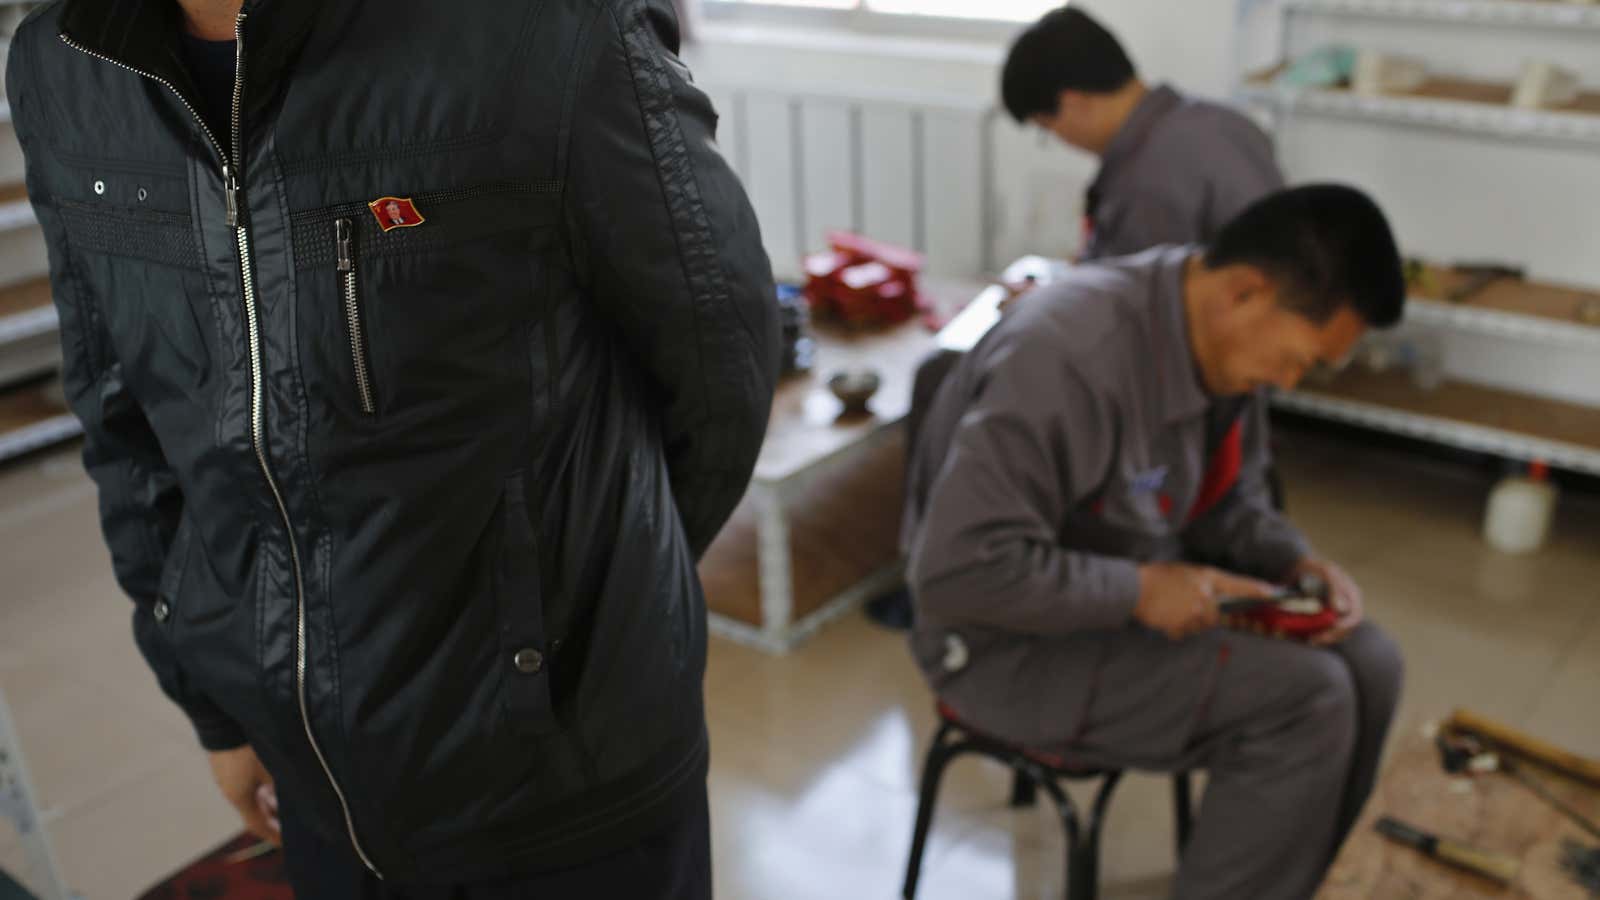 North Korean workers make soccer shoes as a North Korean manager stands supervising inside a temporary factory at a rural village on the edge of Dandong, China.